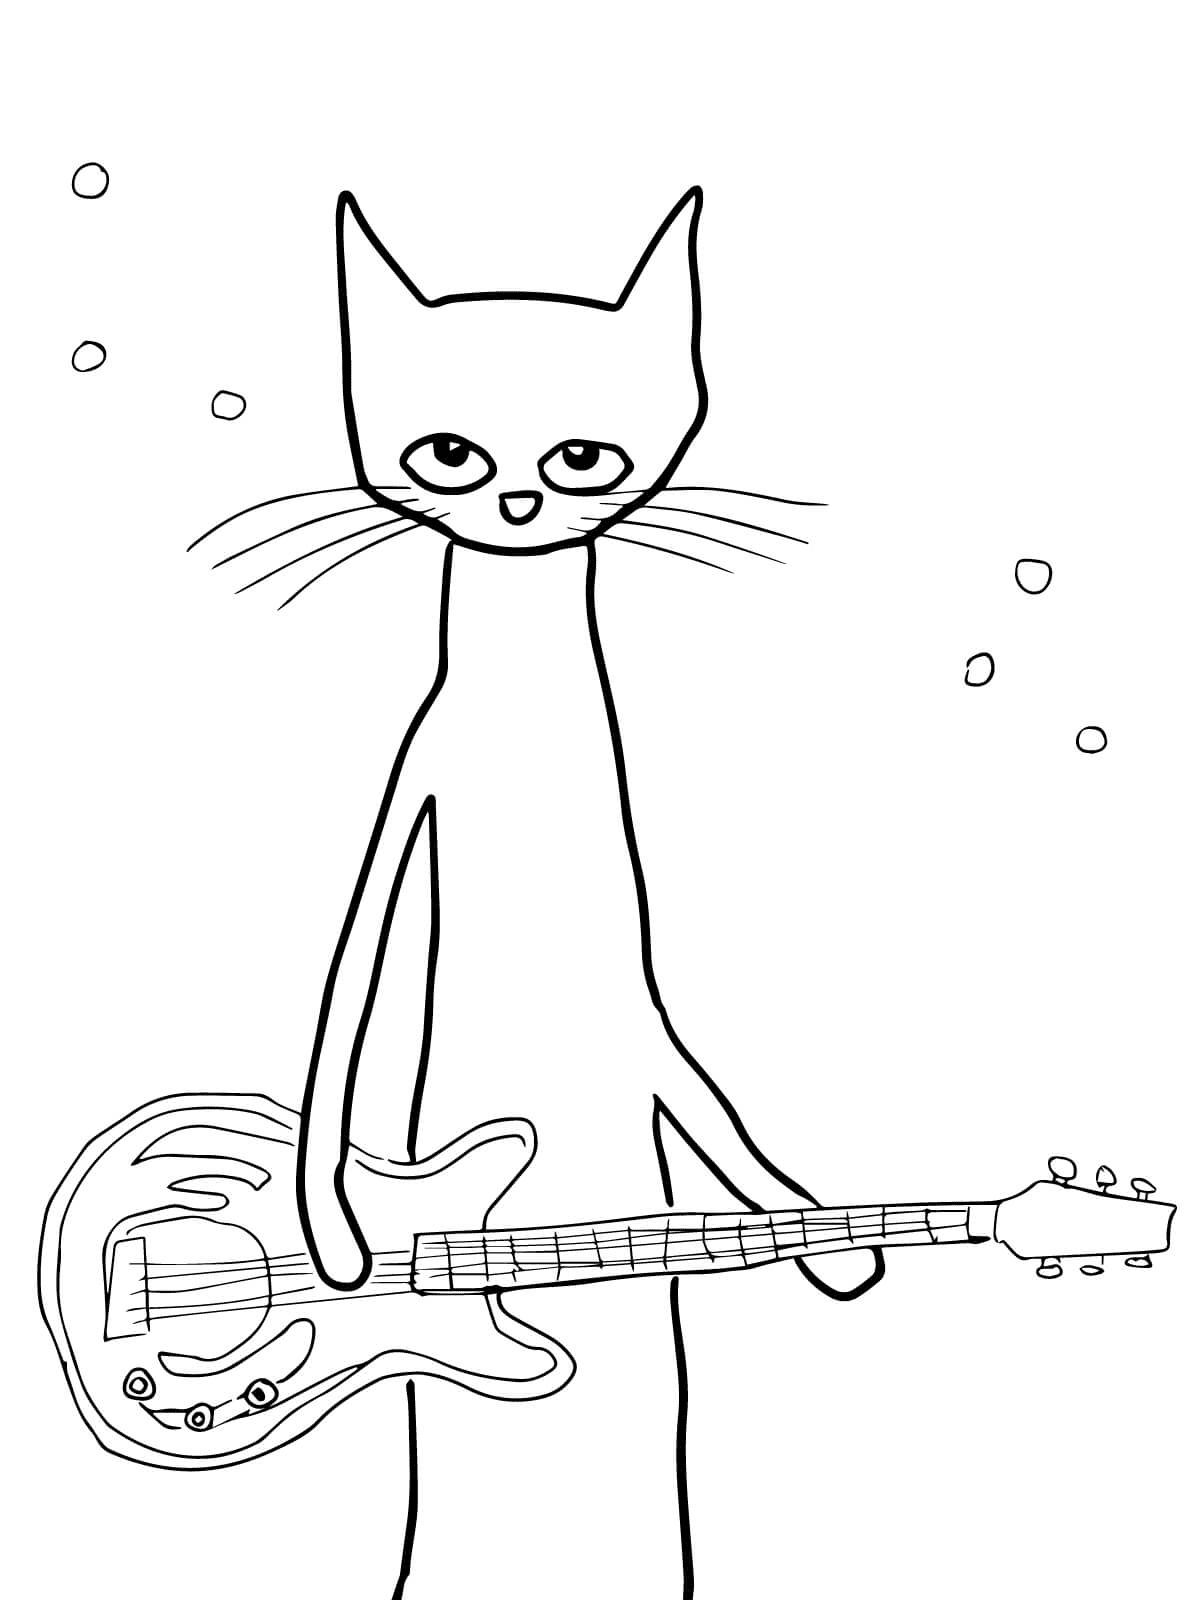 Guitarist Pete the Cat Coloring Page